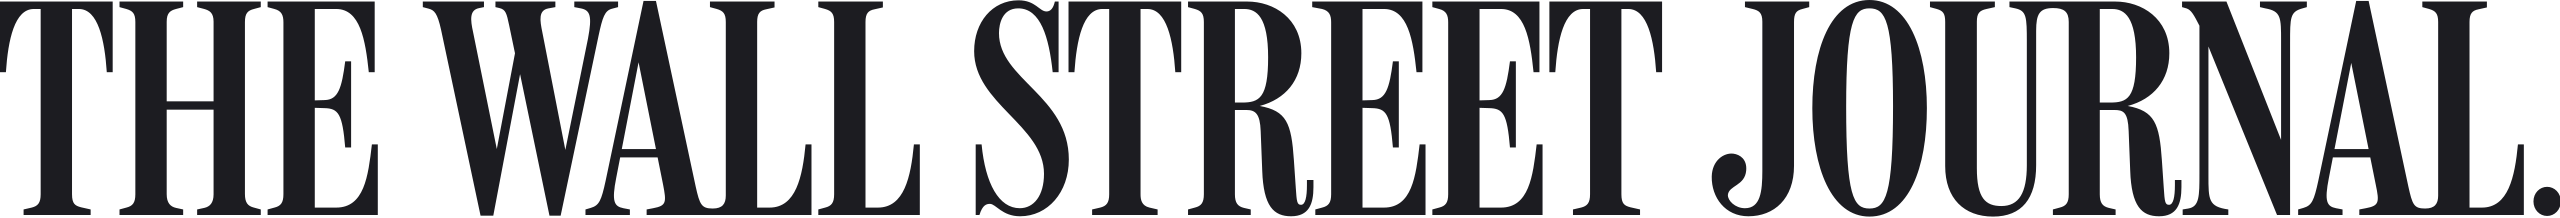 The Wall Street Journal logo in black and white.